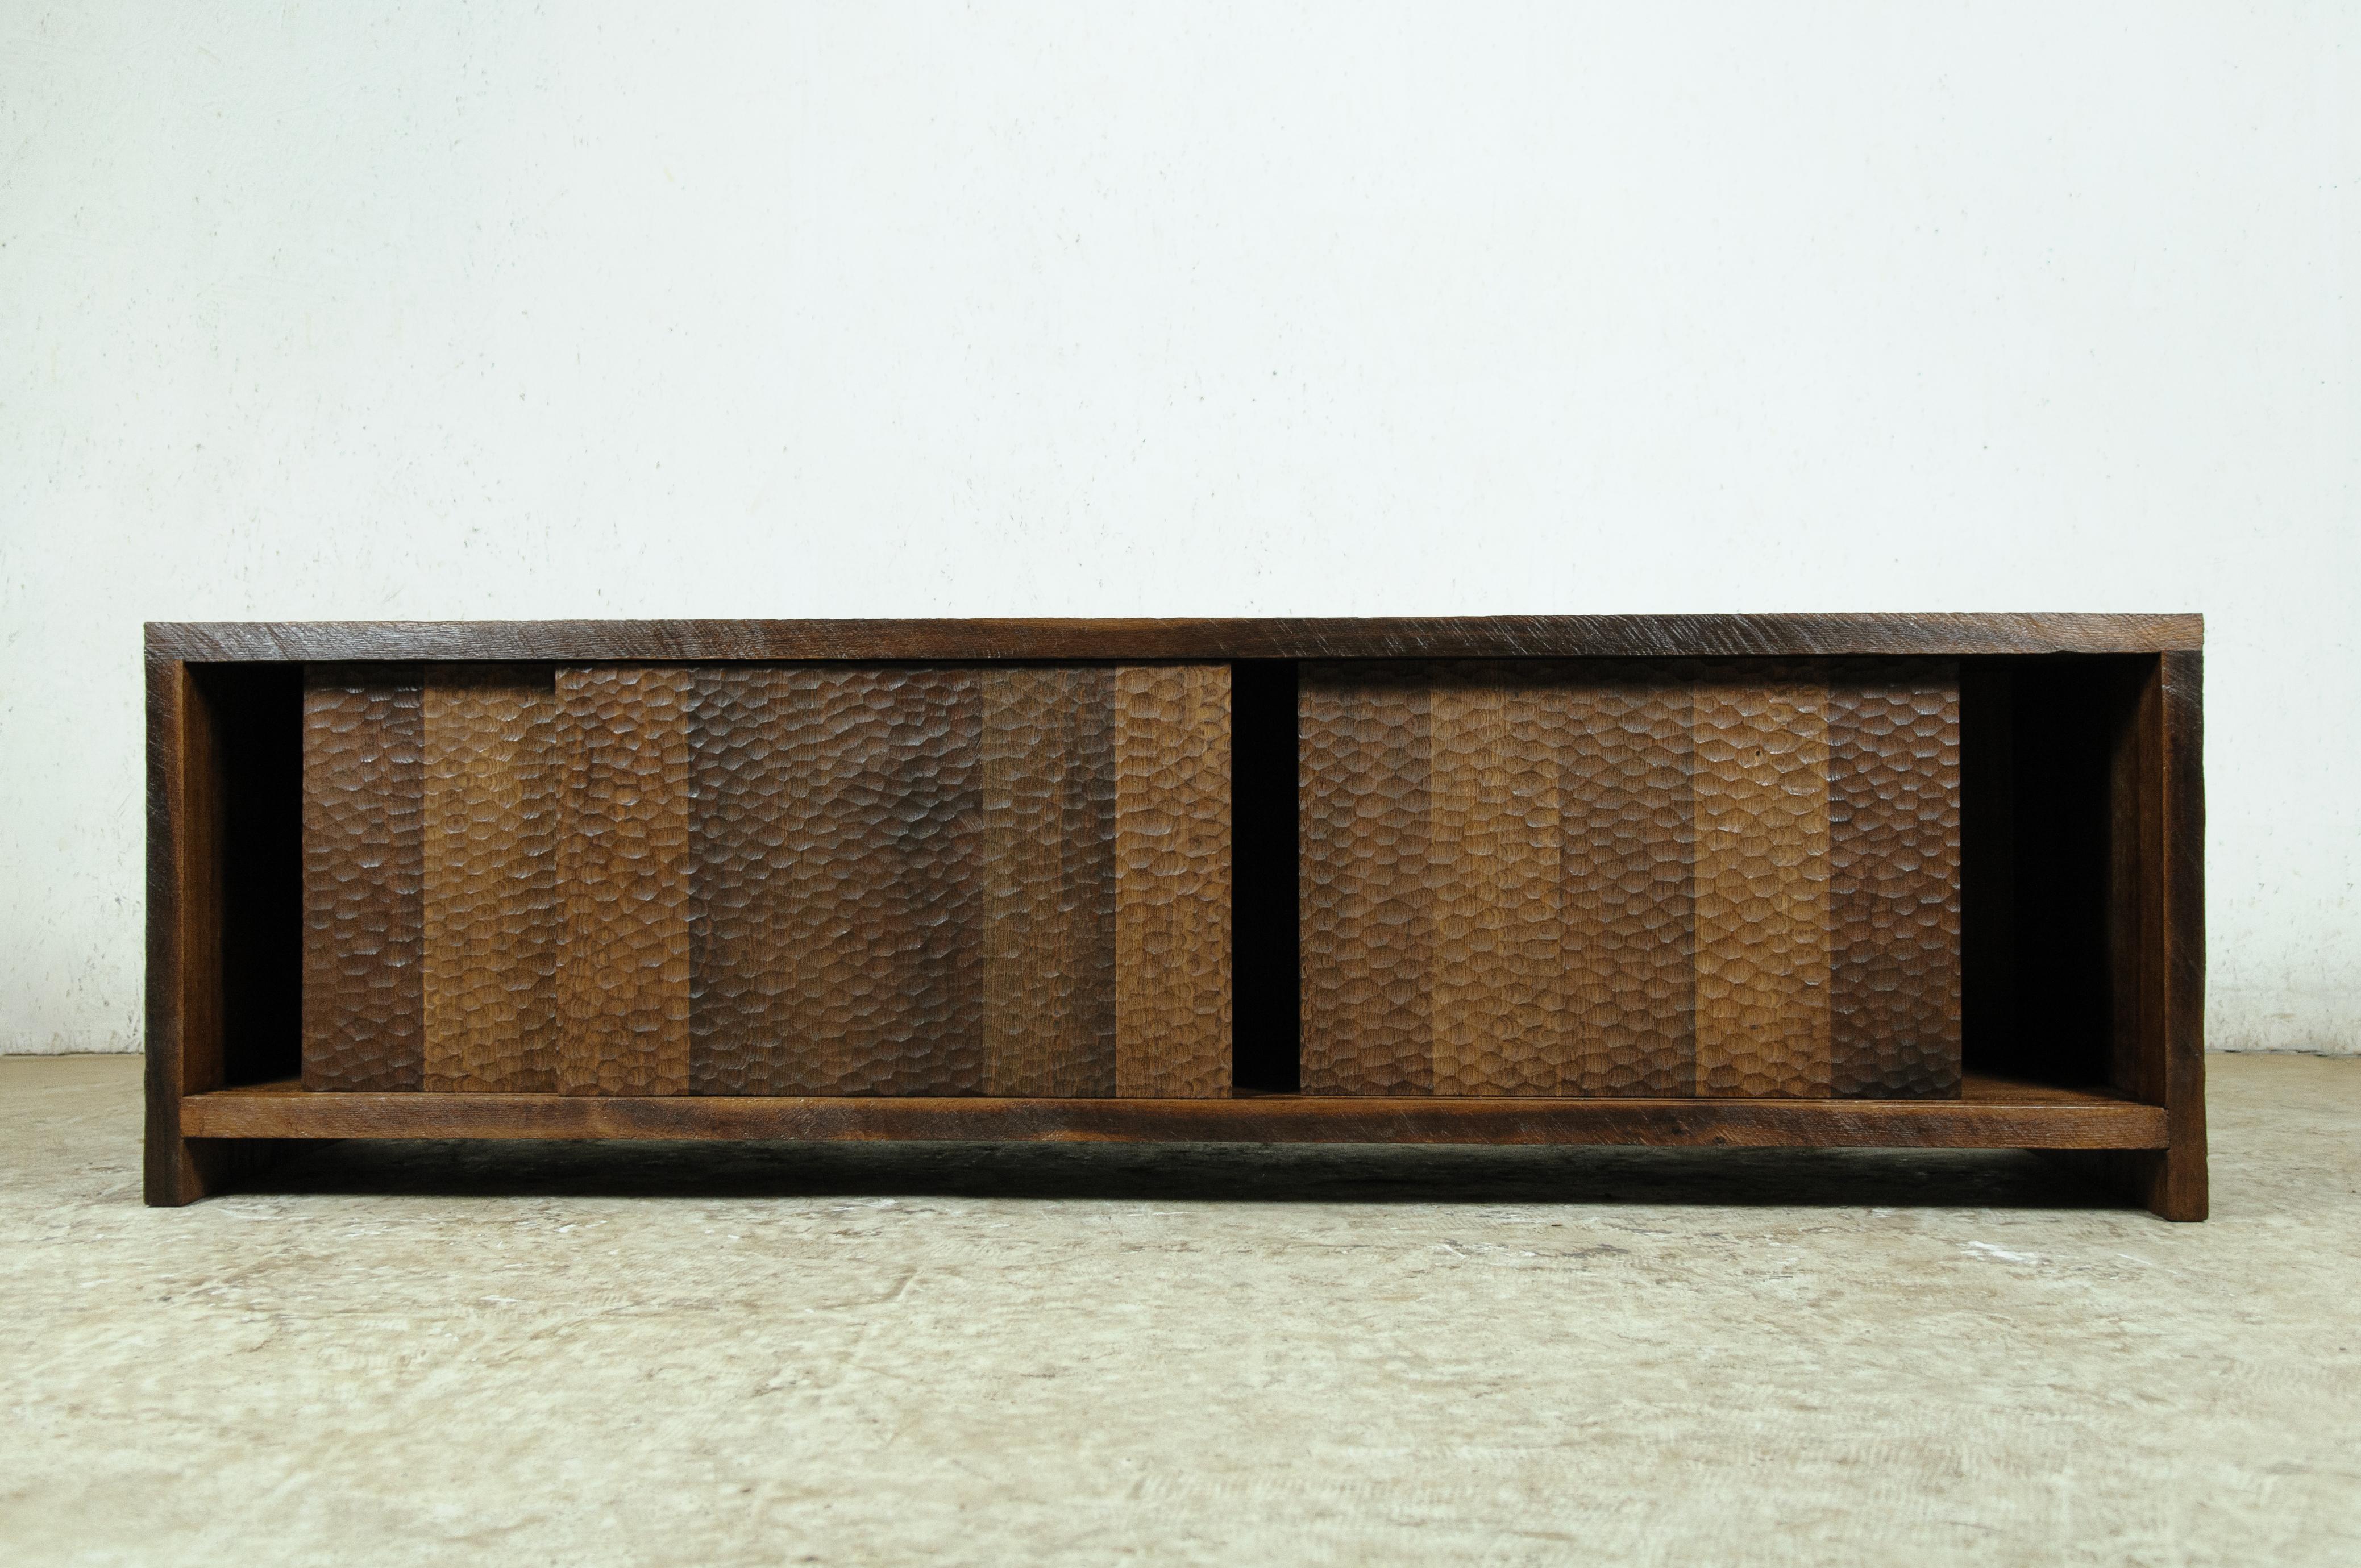 Credenza, cabinet made of solid oak (+ linseed oil), with sliding doors

Made to order - Custom size

SÓHA design studio conceives and produces furniture design and decorative objects in solid oak in an authentic style. Inspiration to create all